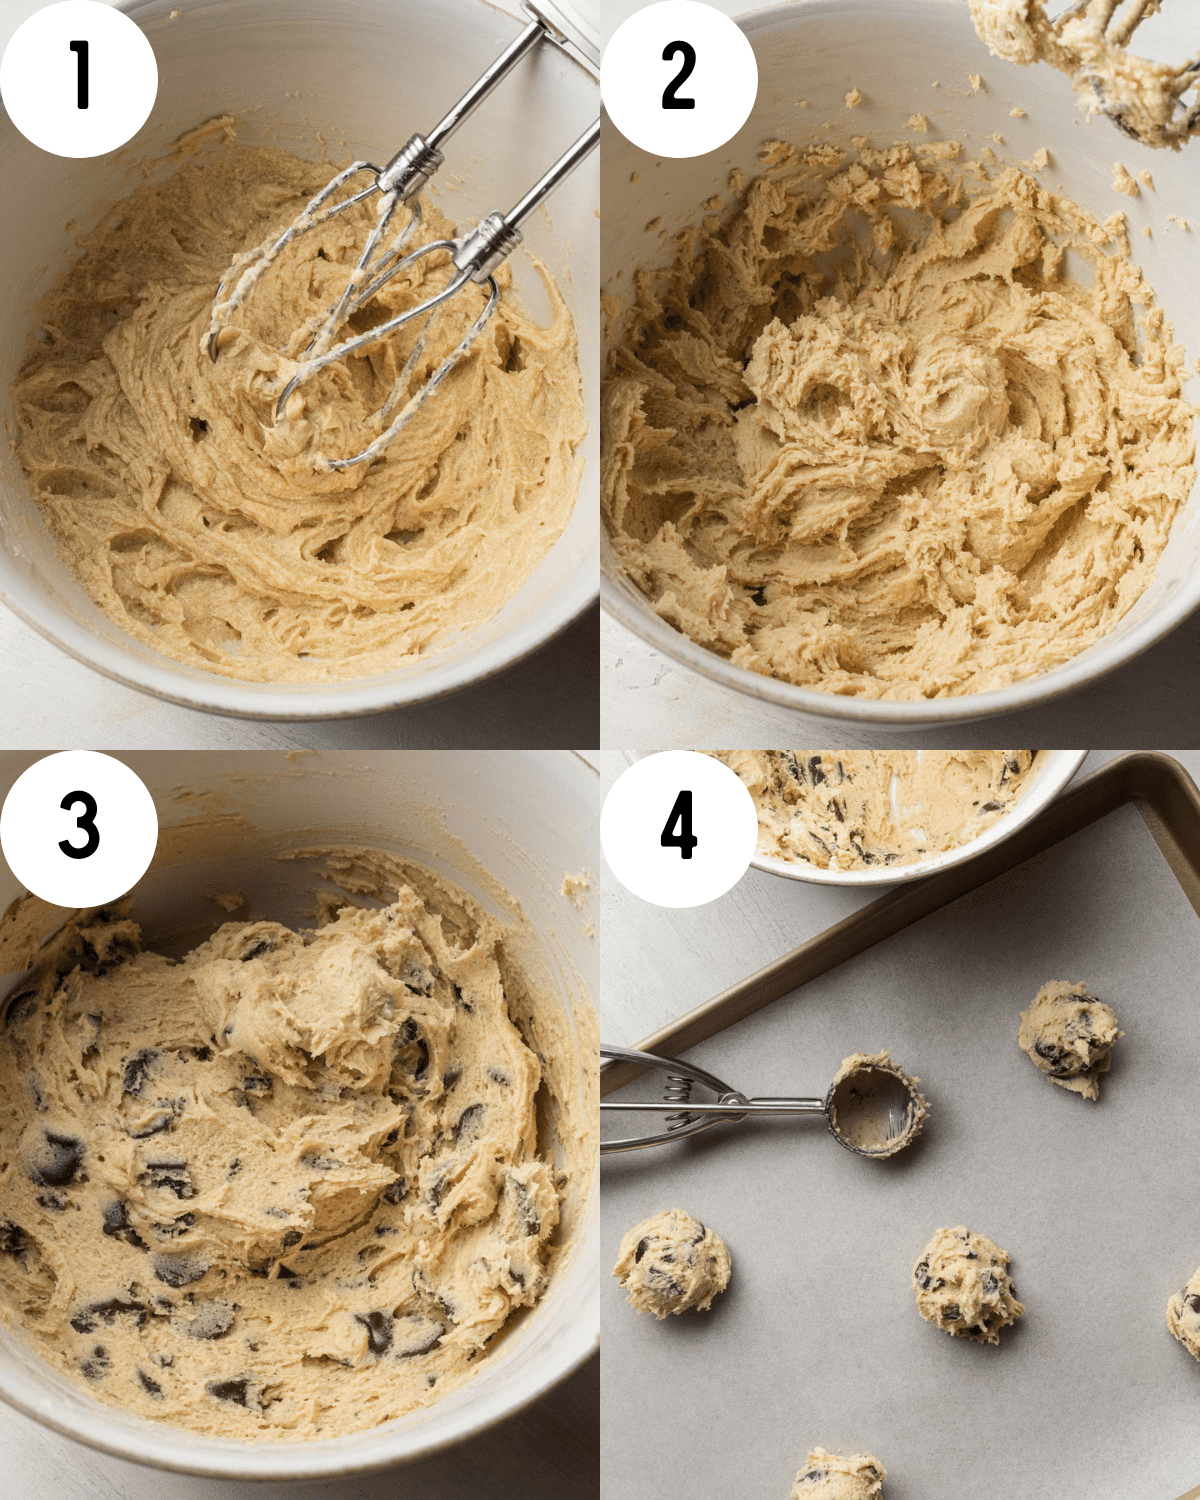 step by step instructions. 1- mixed wet ingredients in a white bowl. 2- dry ingredients added to the wet. 3-chocolate chips folded into batter. 4-cookies scooped onto a parchment paper lined baking sheet